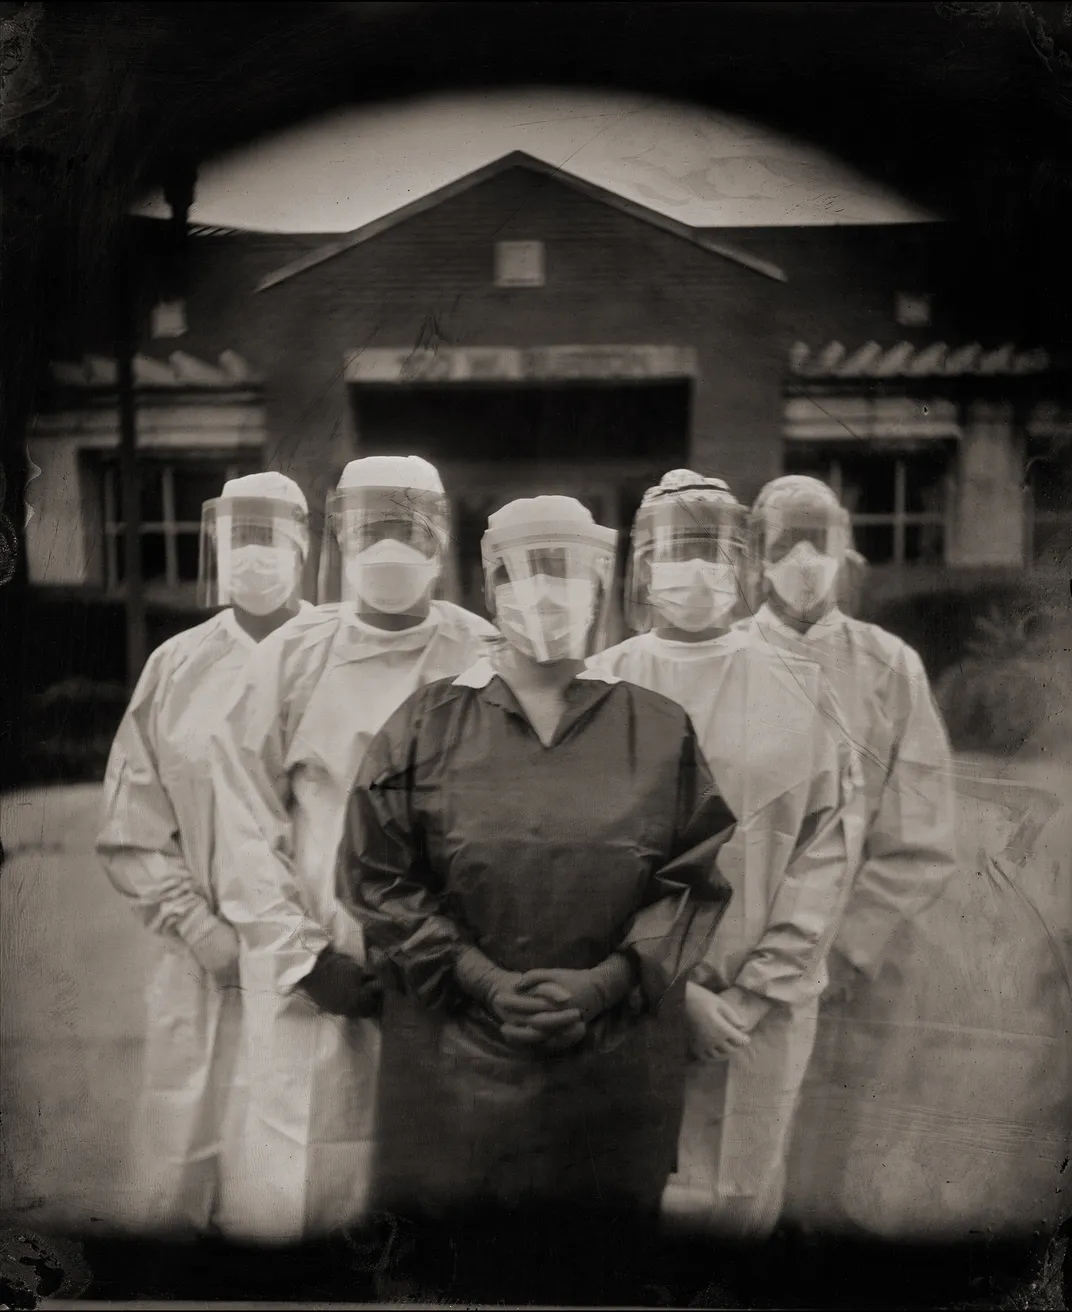 4 - During the early months of the Covid-19 pandemic, medical staff at the Rutherford County Health Department in downtown Murfreesboro stand ready in their personal protection equipment to treat patients.